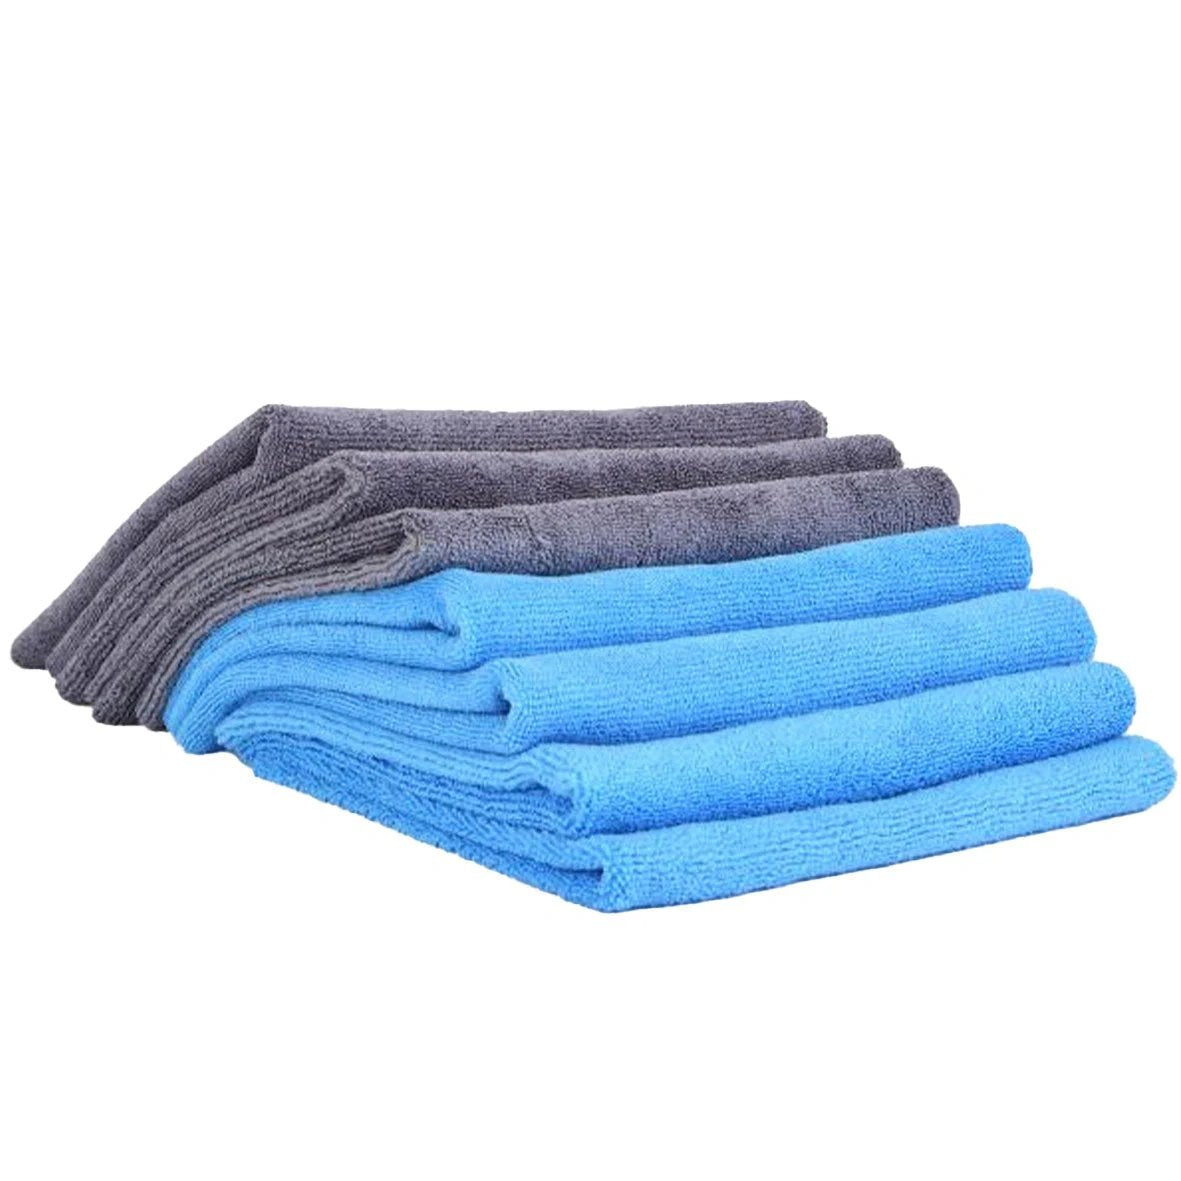 Joes-No-Flats Micro Fibre Towel Cleaning Pack